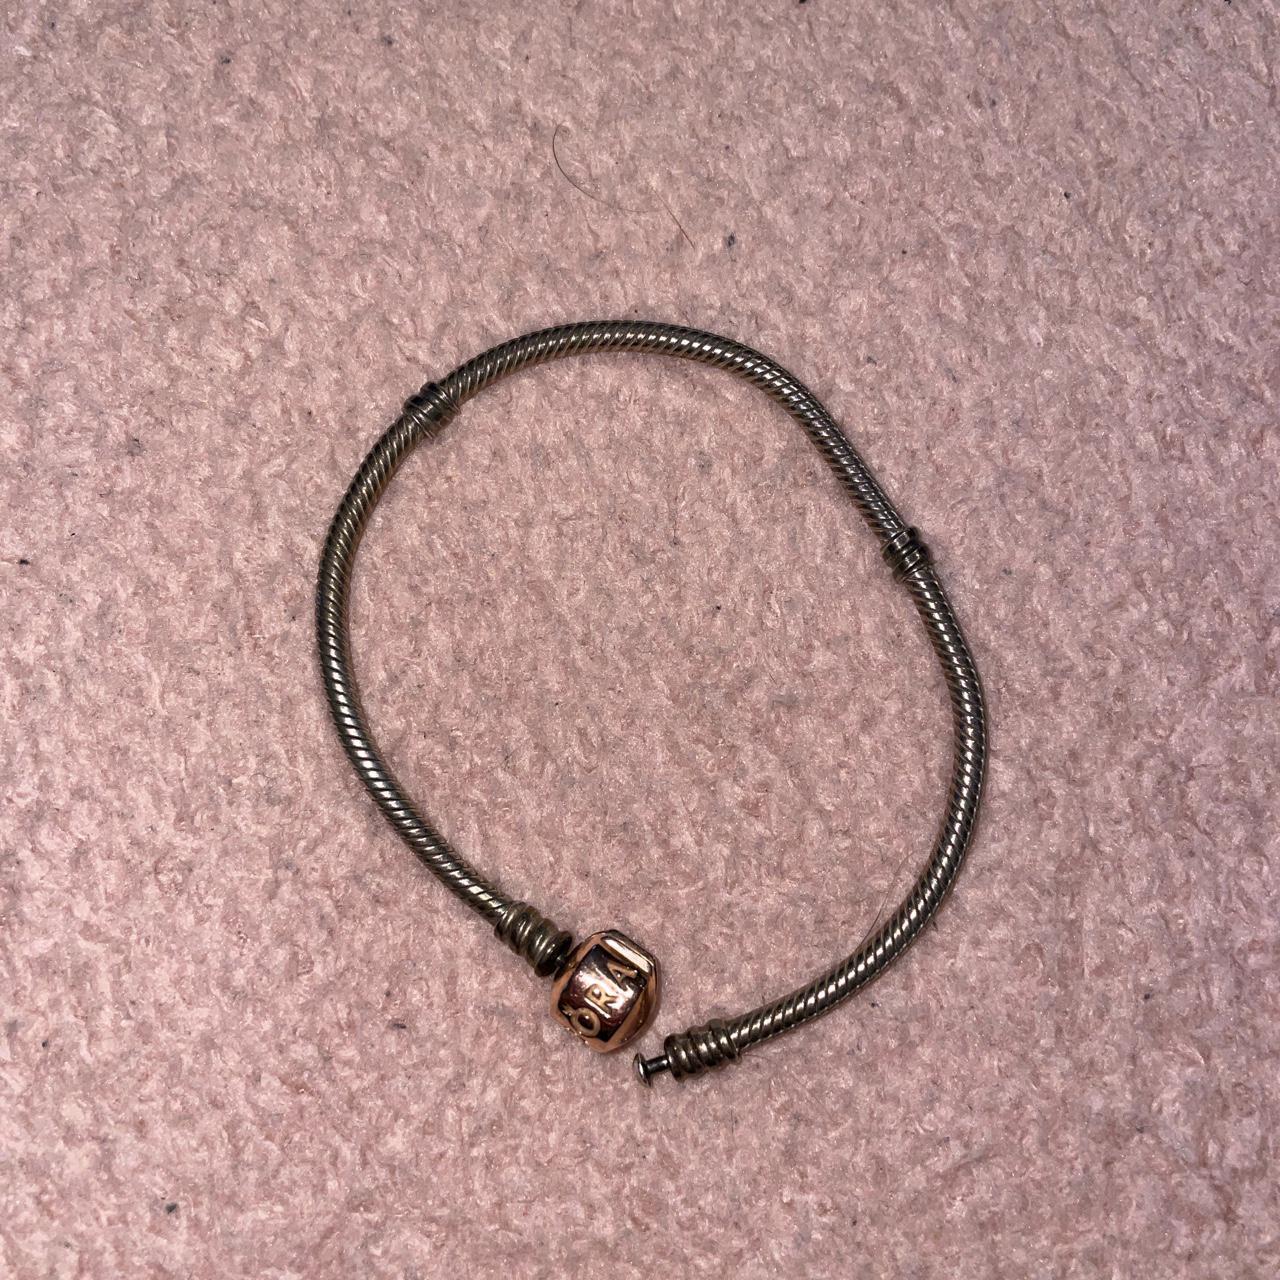 Product Image 1 - Pandora rose gold and silver